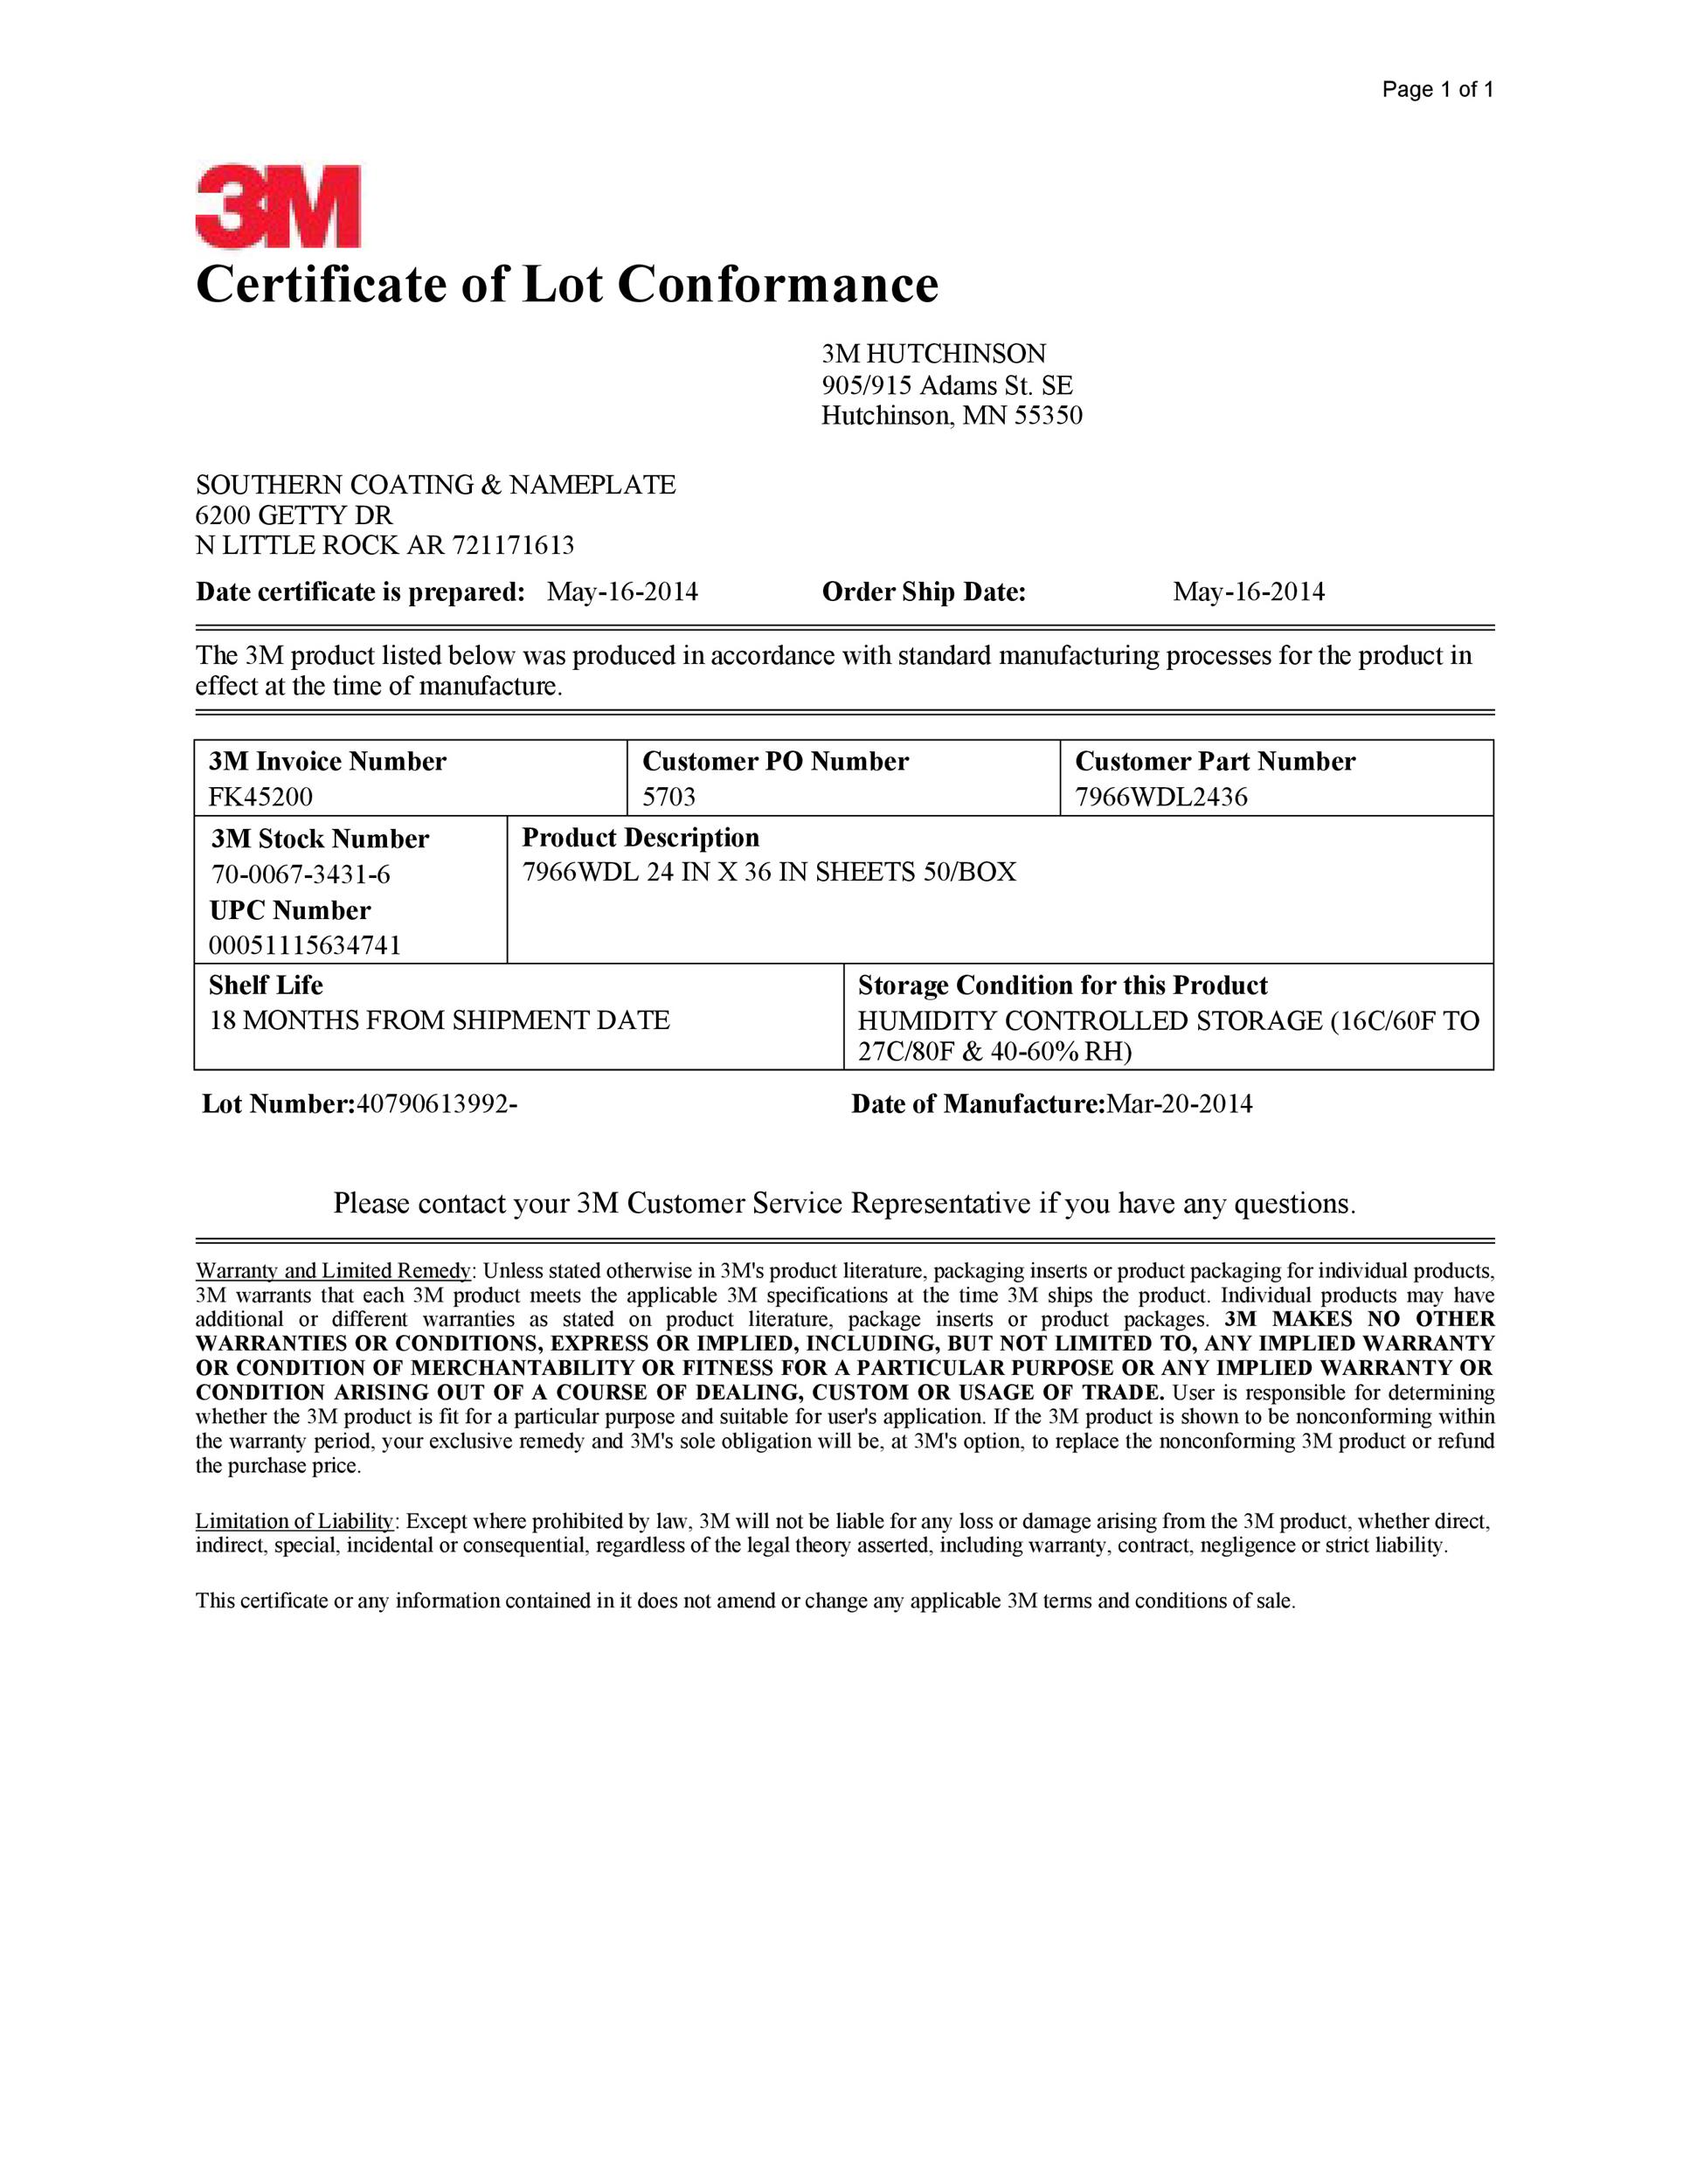 40 Free Certificate of Conformance Templates & Forms ᐅ TemplateLab